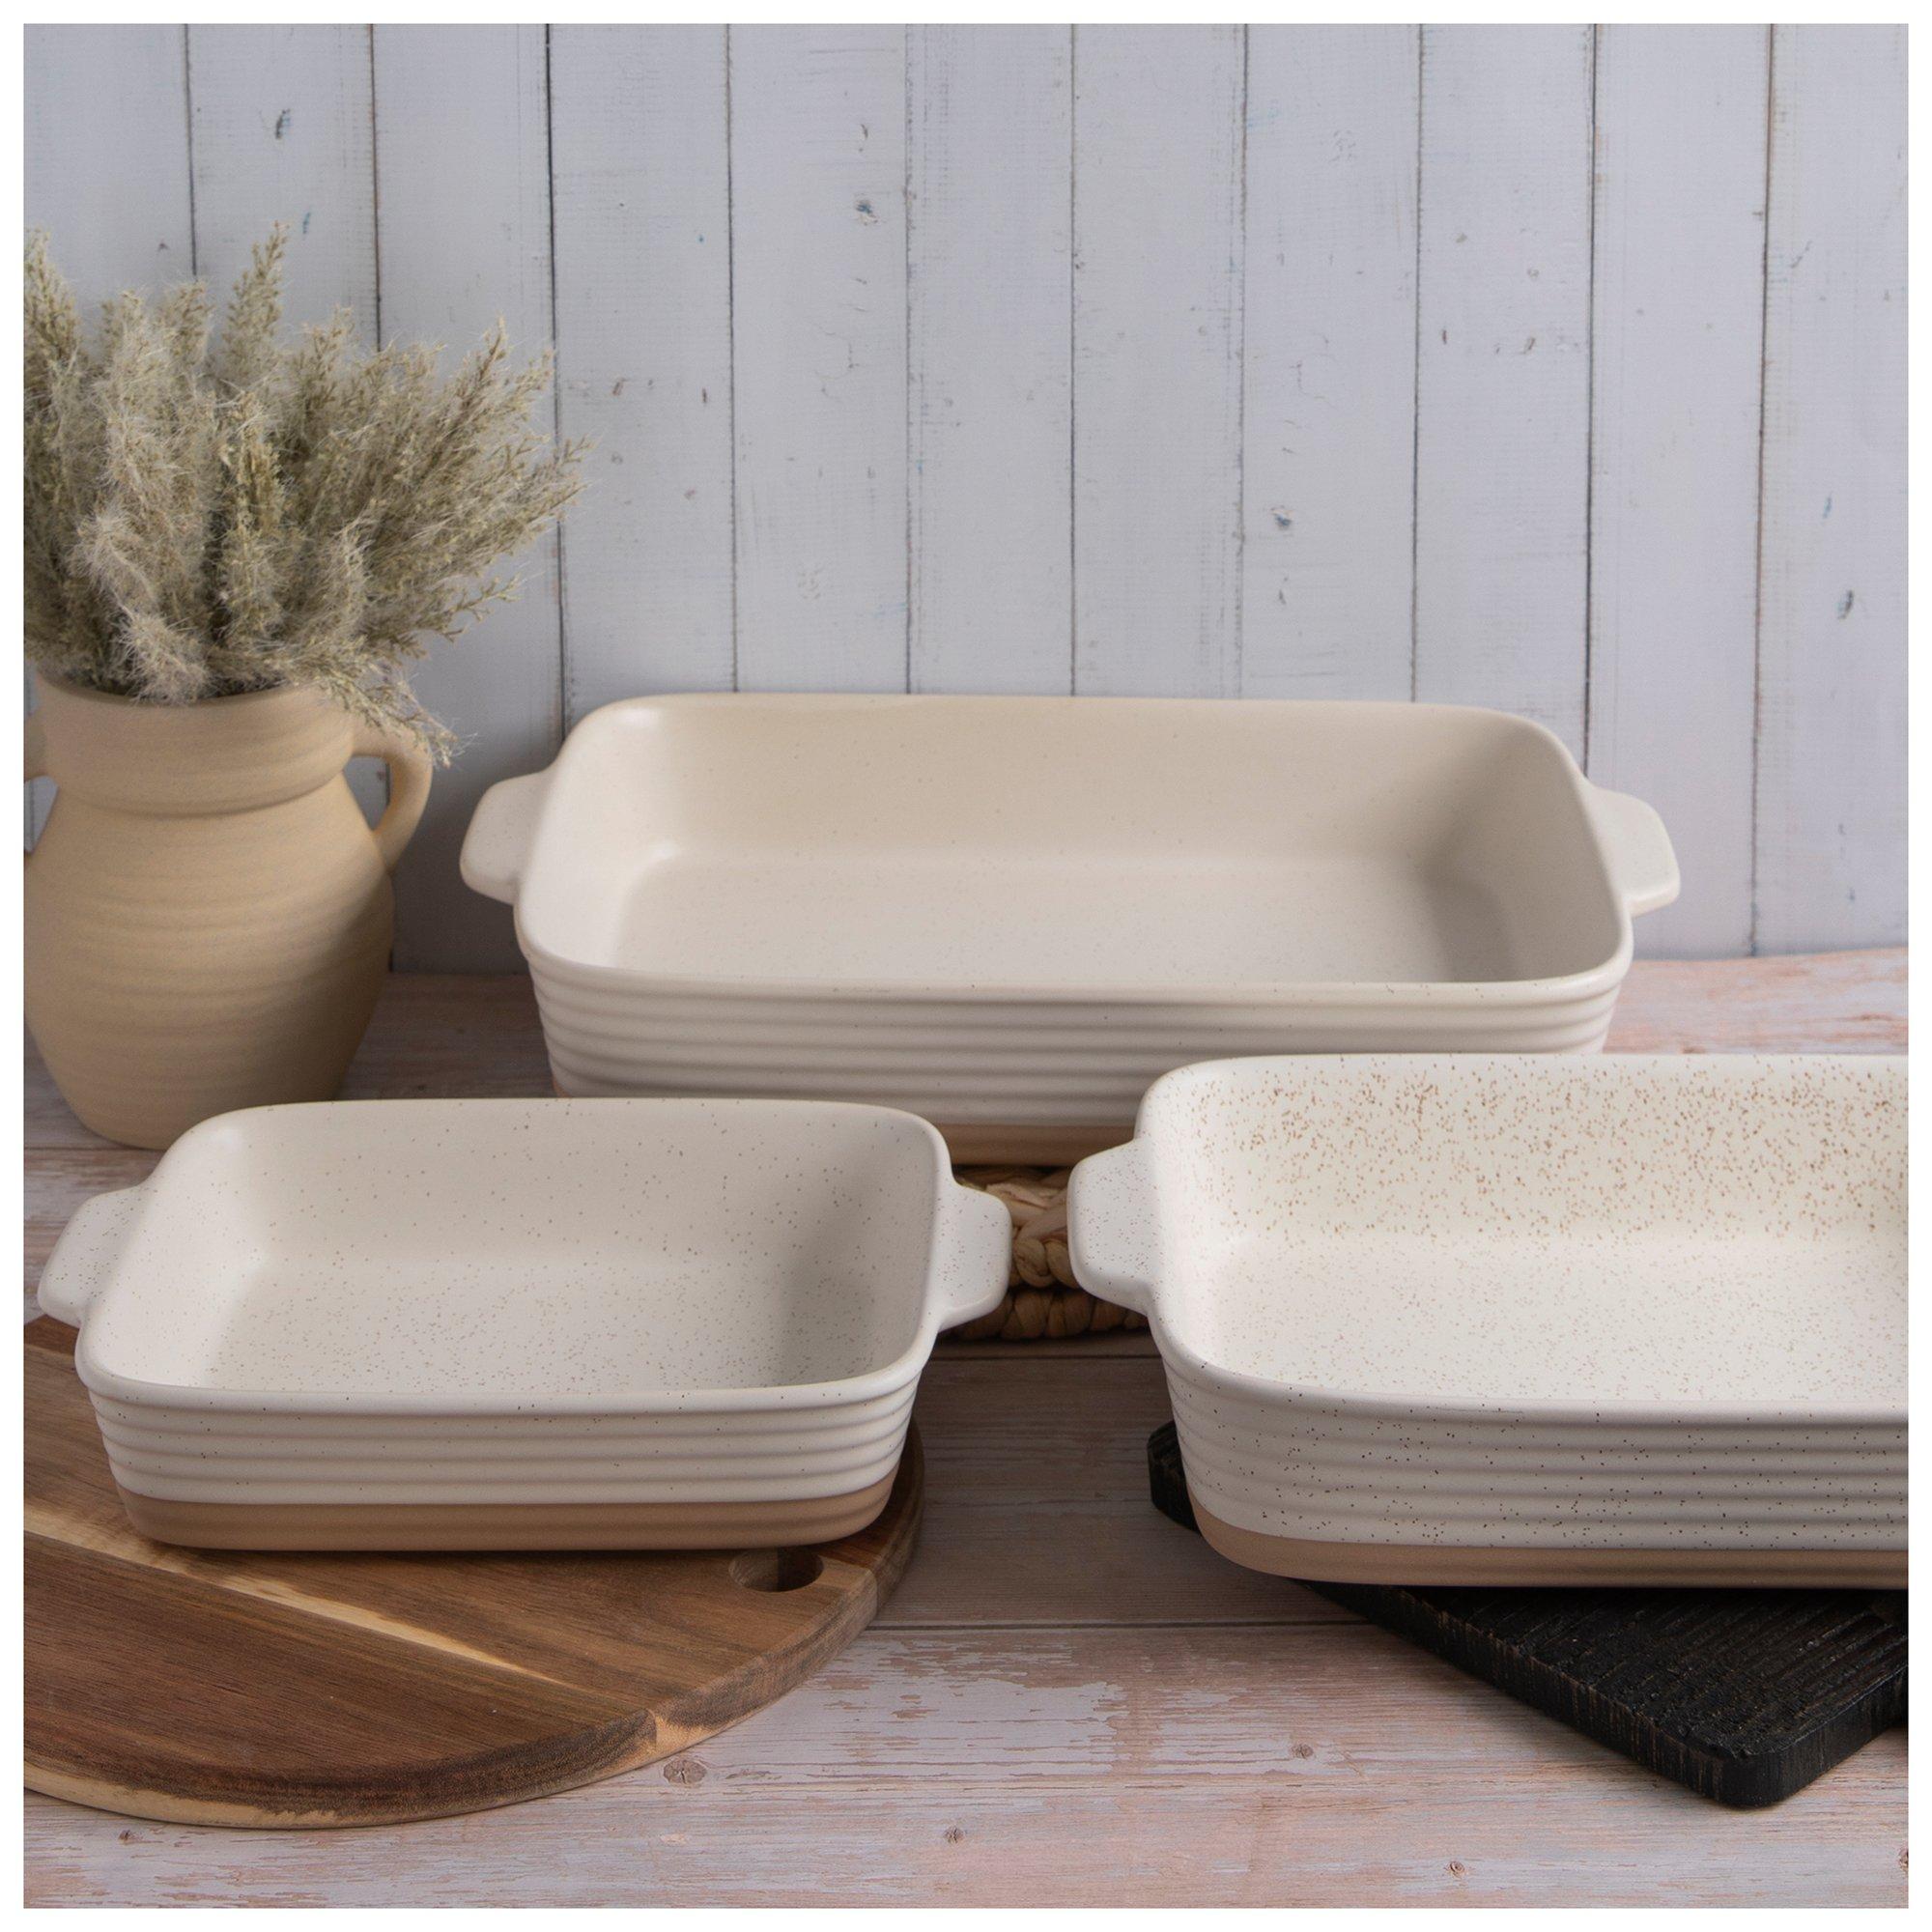 Speckled Stoneware Baking Dishes - 3 Piece Set | Hobby Lobby | 5994421